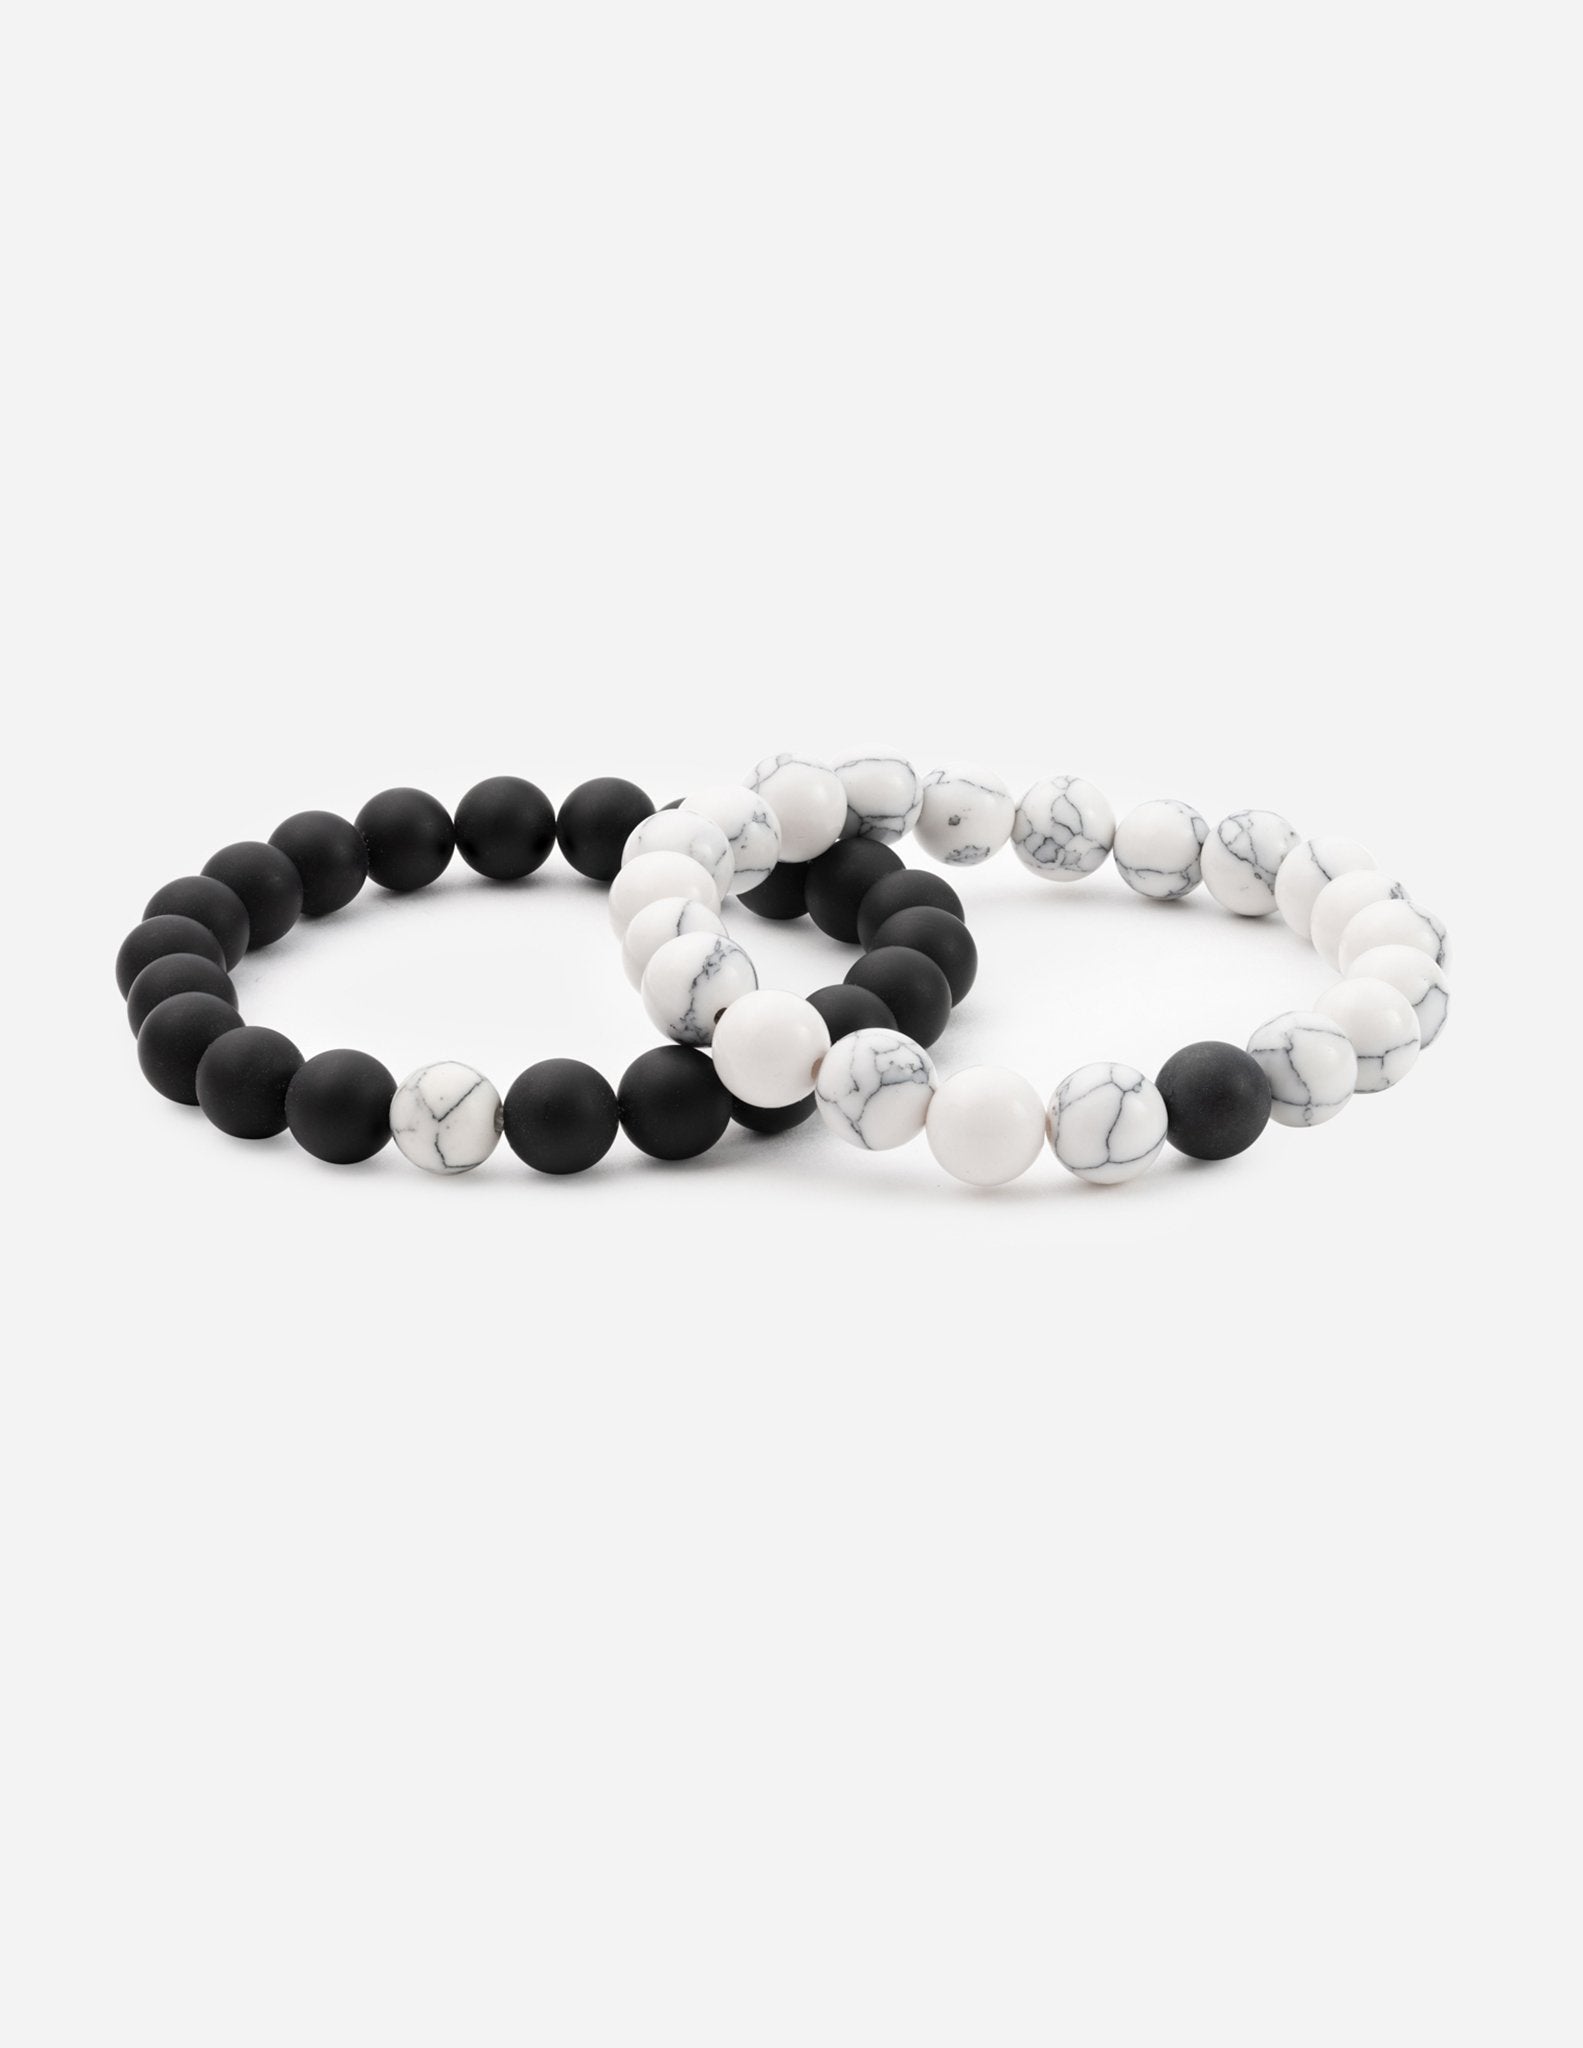 Best Selling Shopify Products on elevatedfaith.com-5